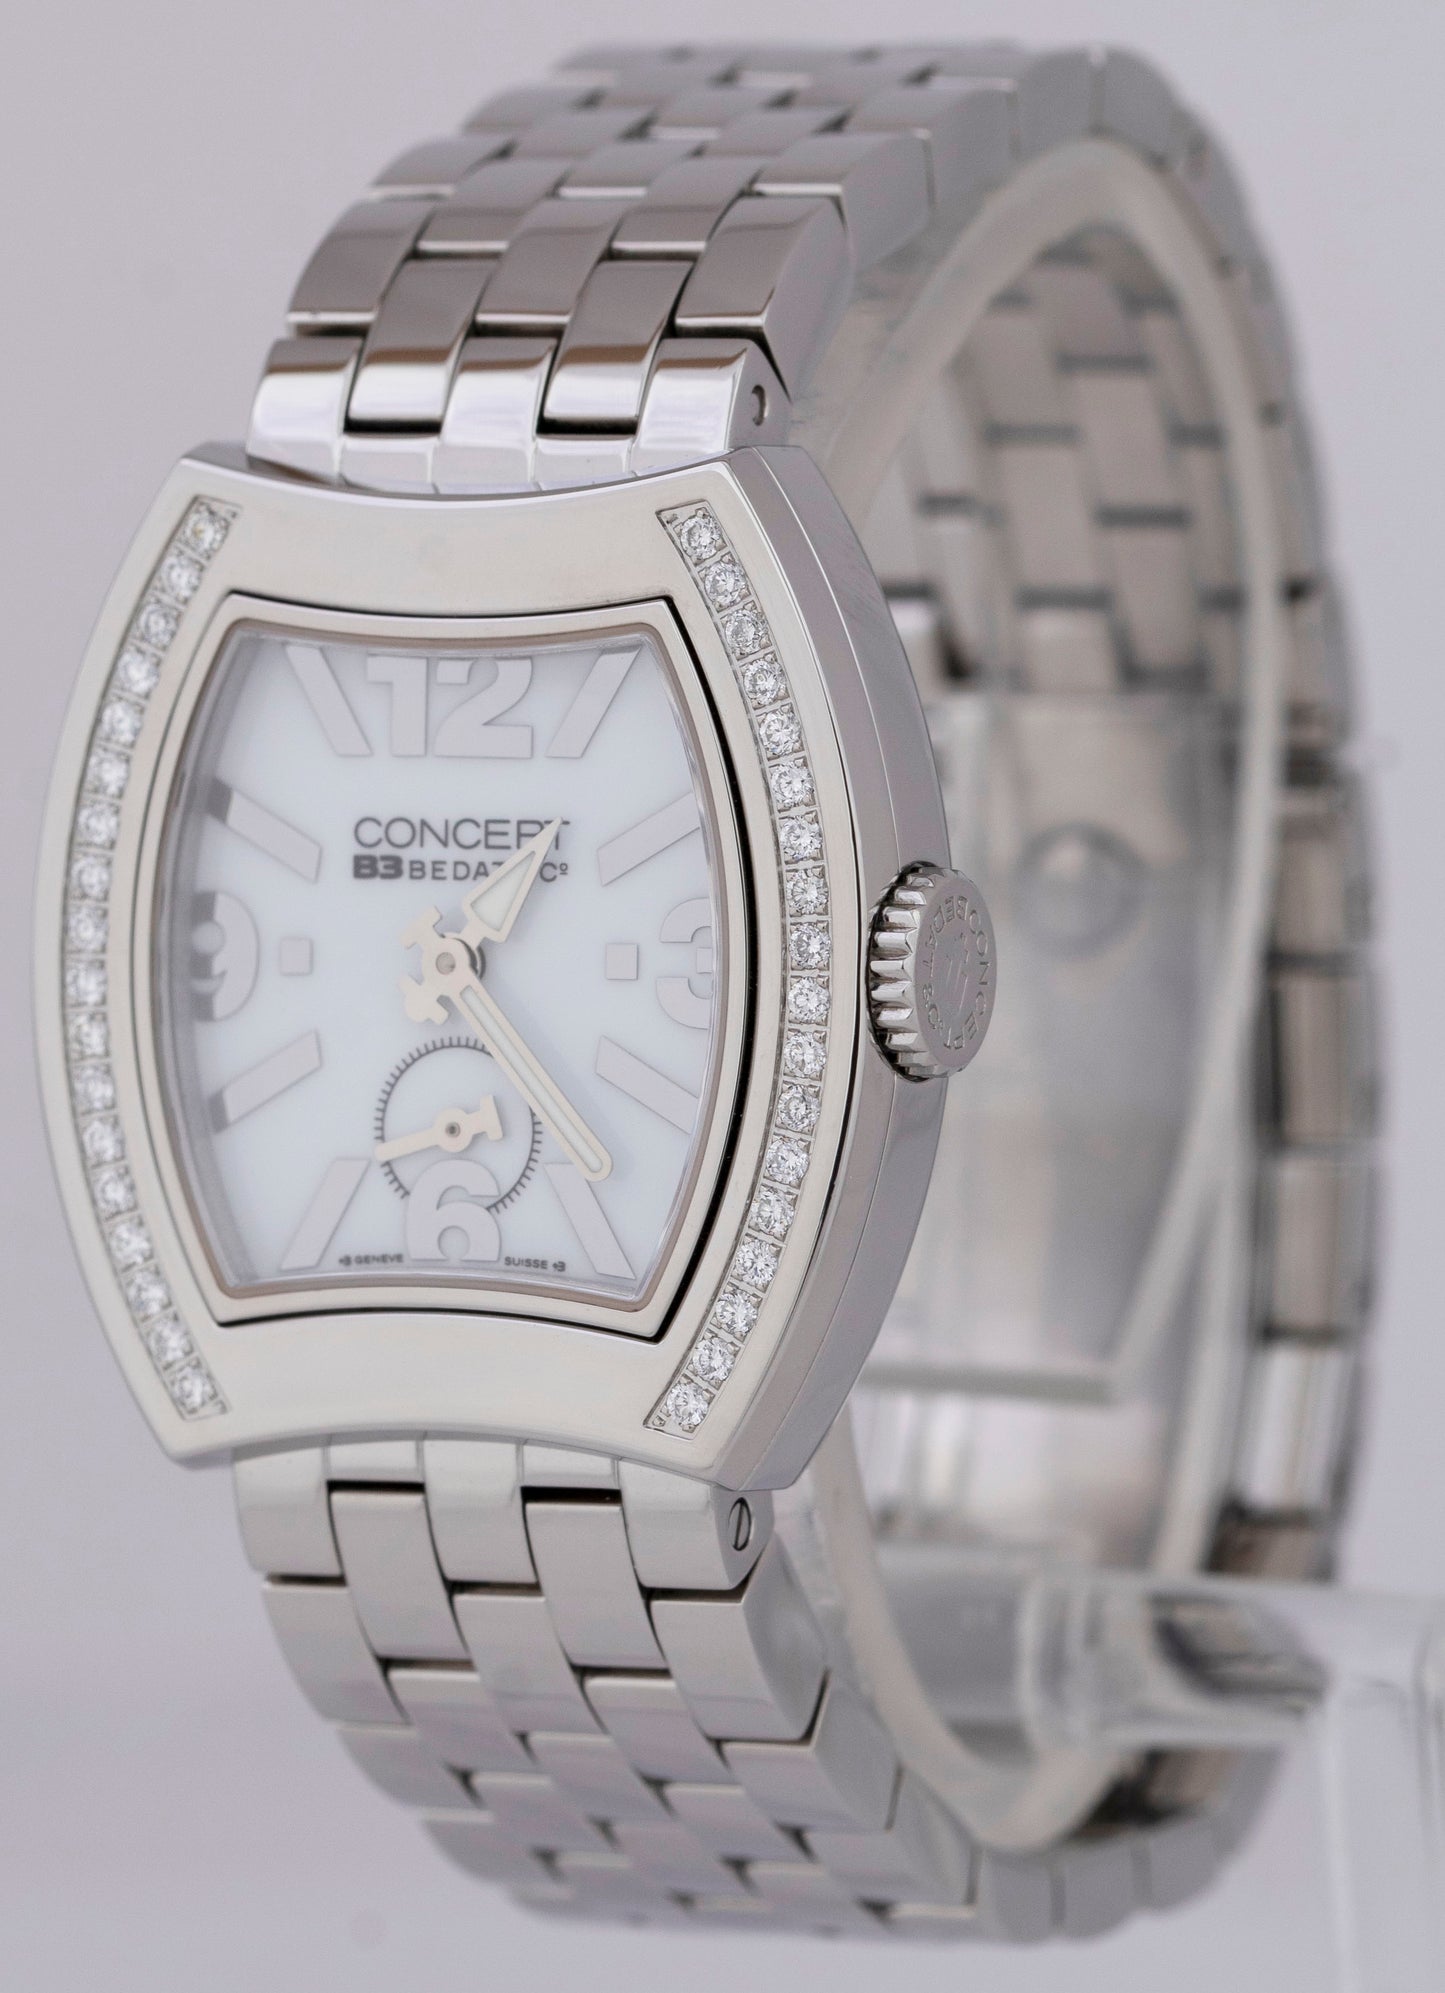 Ladies Bedat & Co Concept DIAMOND Stainless PAPERS White 30mm Watch CB03 B+P